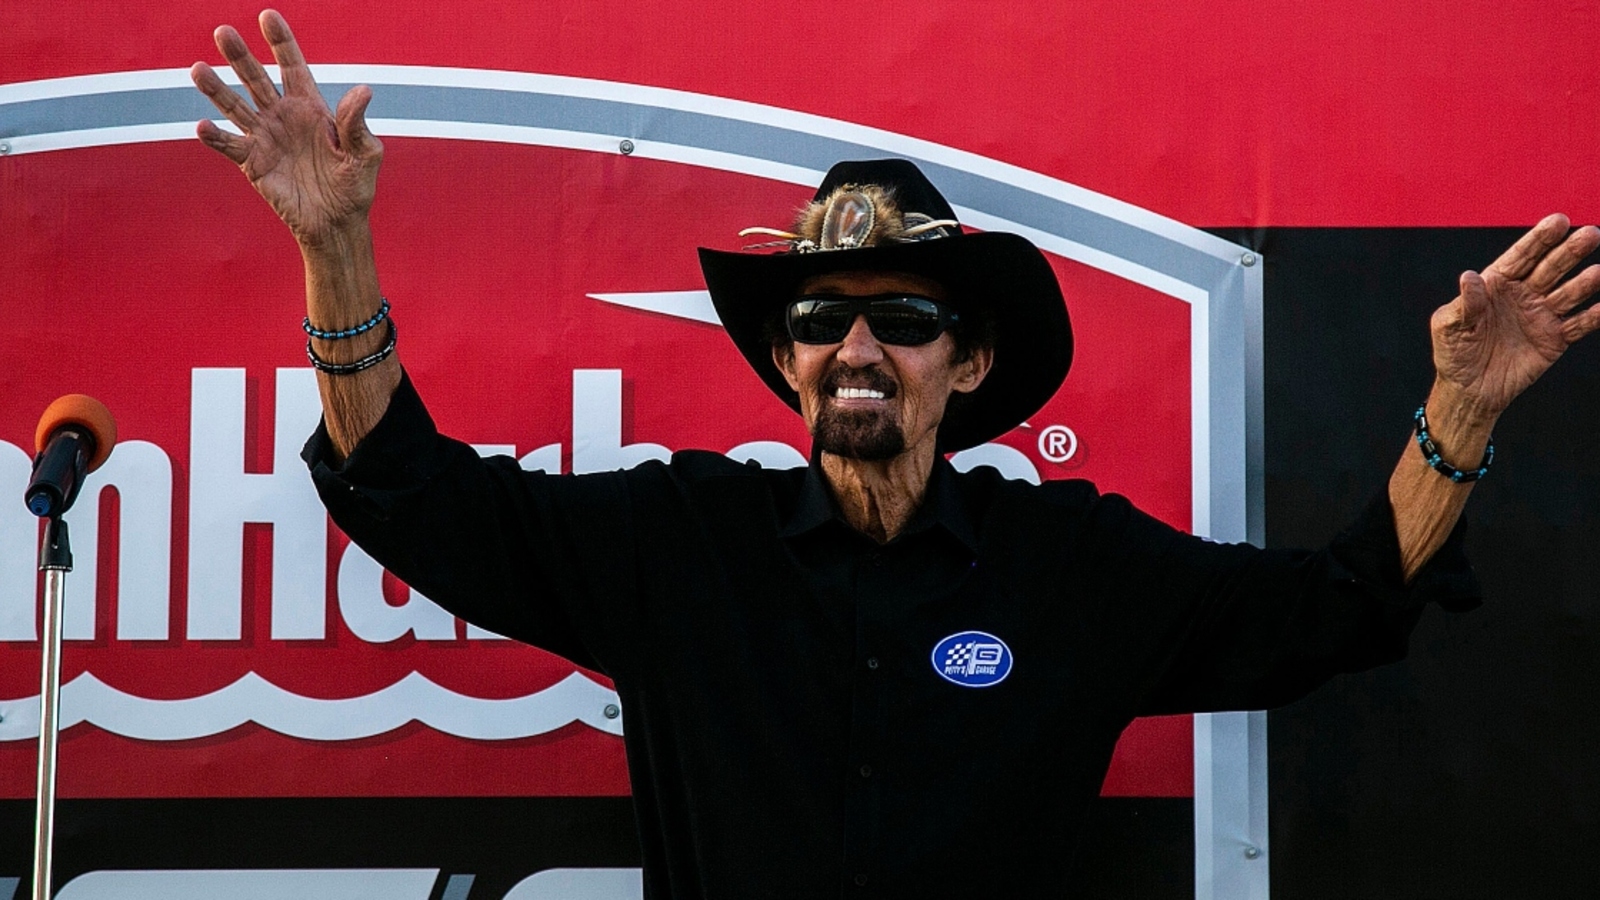 Richard Petty, Kyle Petty, Joe Gibbs, and Richard Childress give the command for the Food City 500 at Bristol